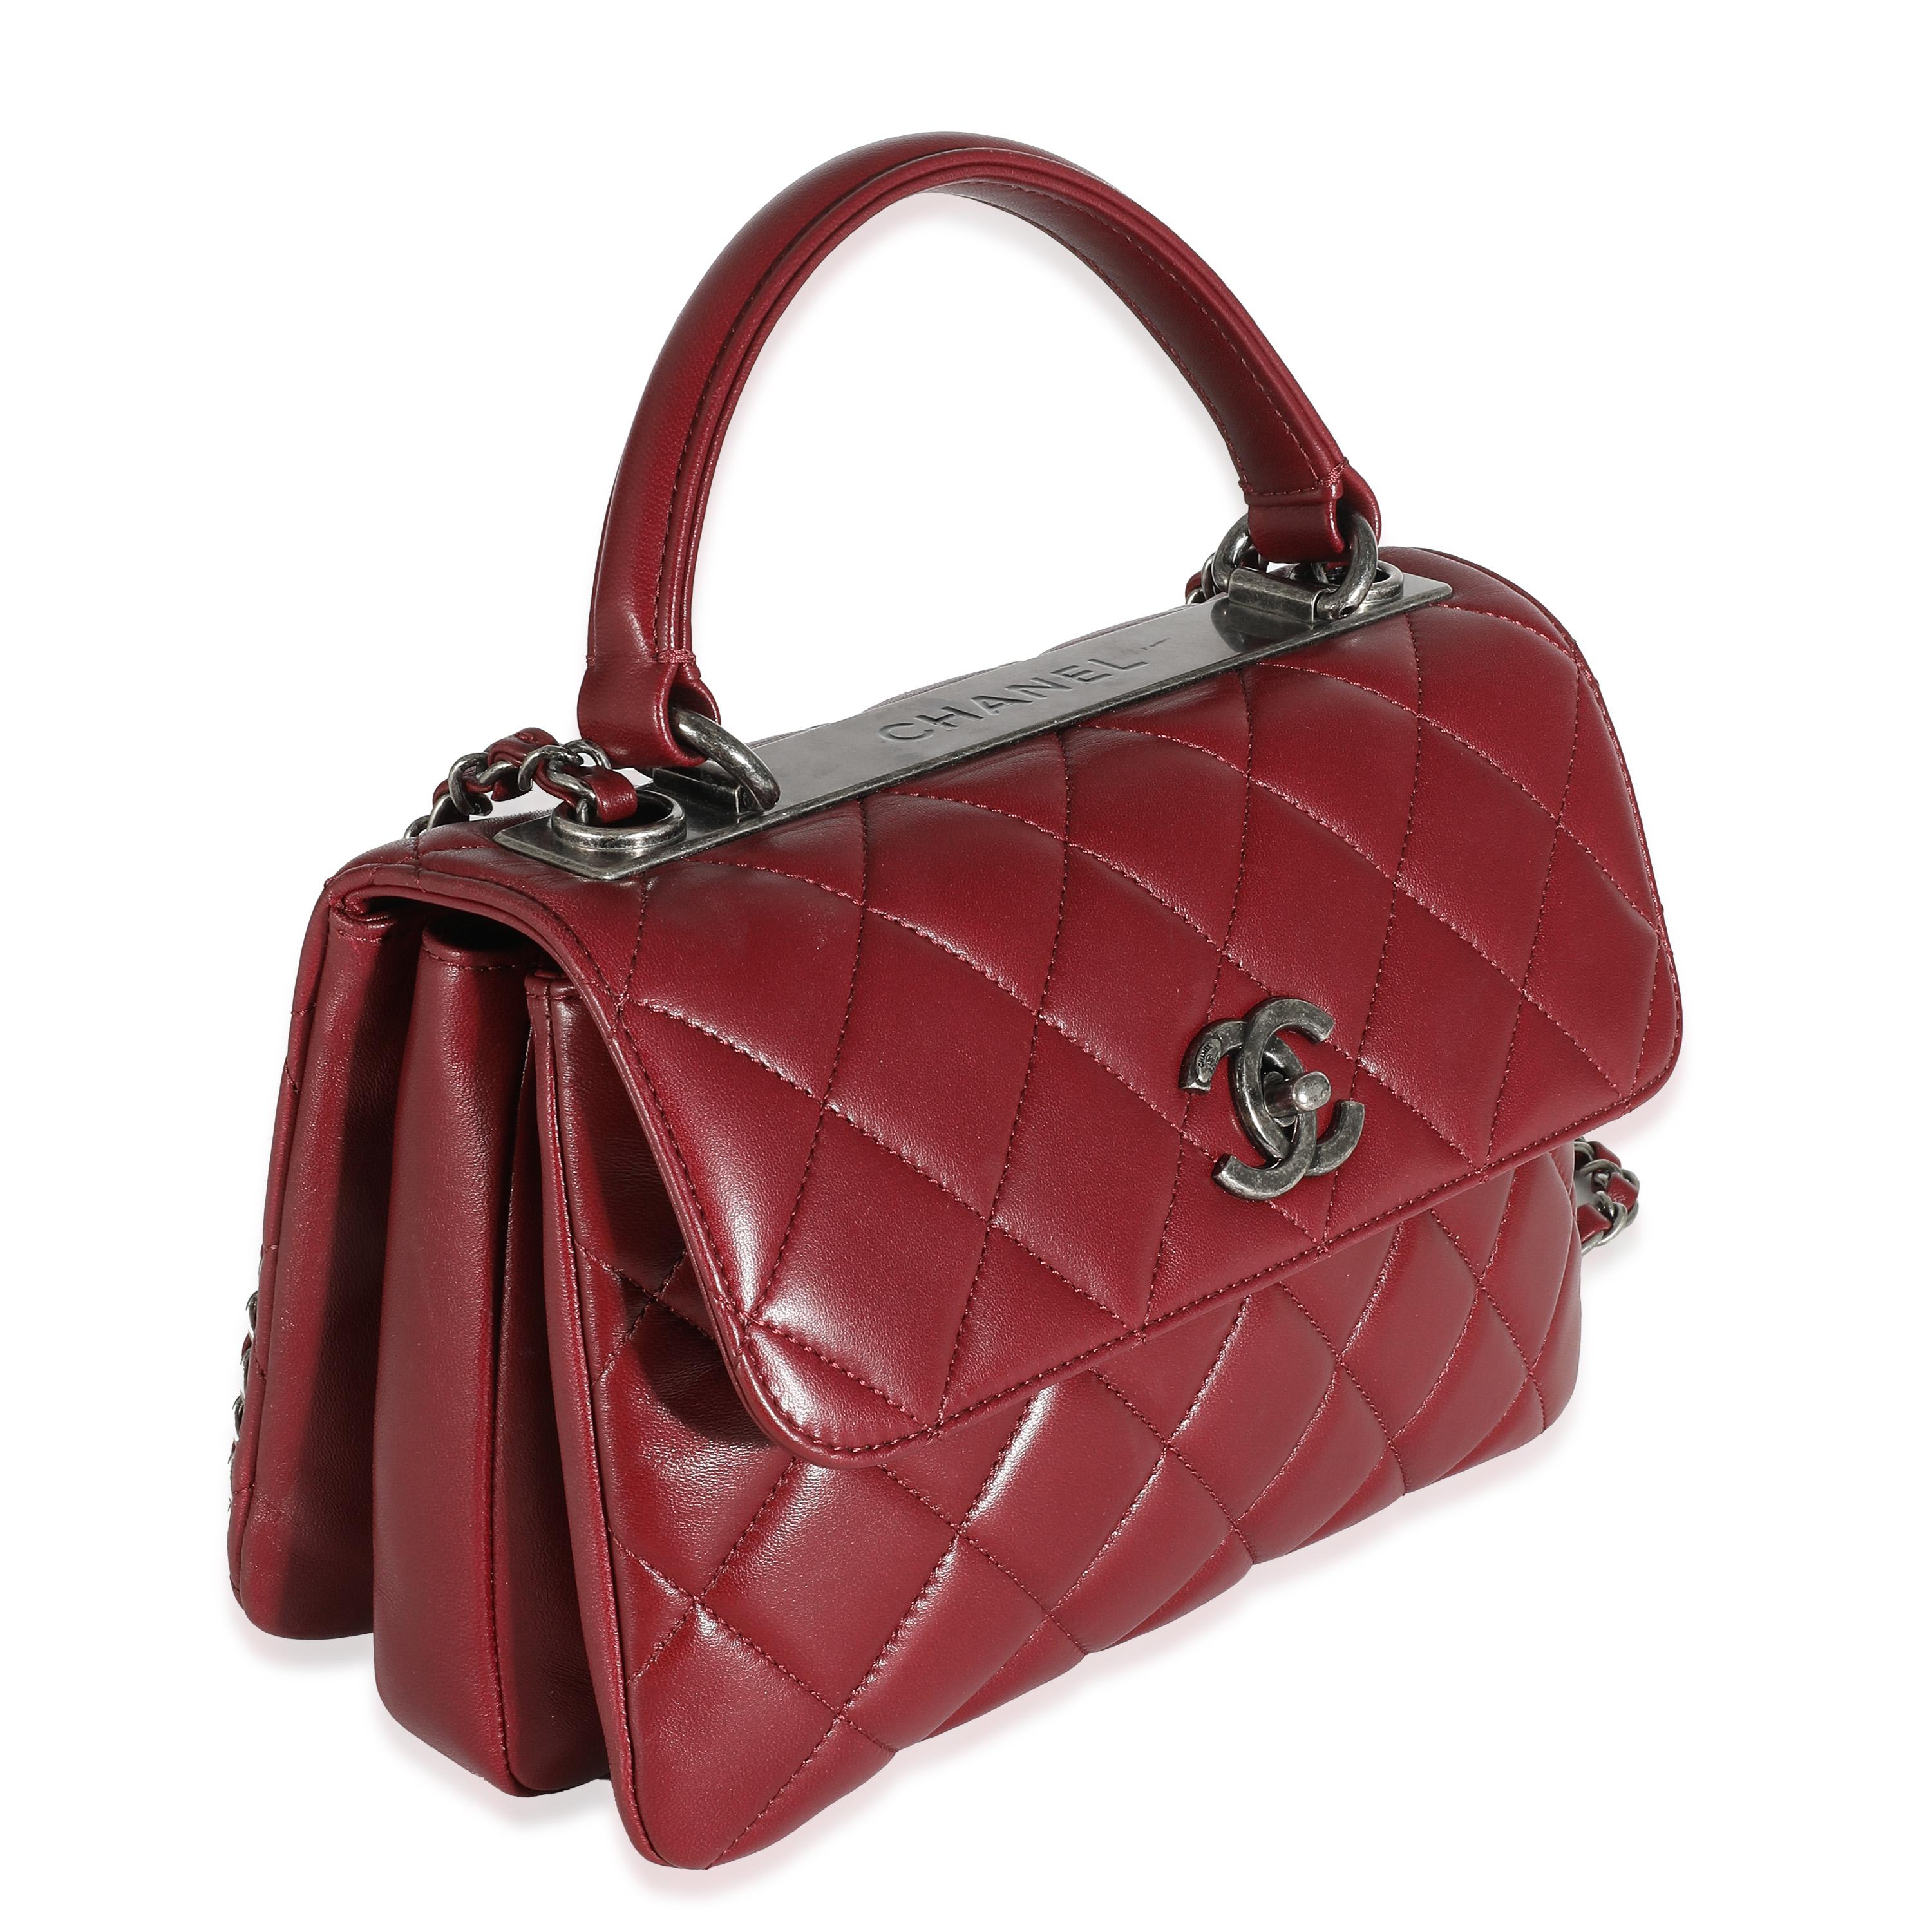 Listing Title: Chanel Burgundy Quilted Lambskin Small Trendy Flap Bag
SKU: 136129
Condition: Pre-owned 
Condition Description: A timeless classic that never goes out of style, the flap bag from Chanel dates back to 1955 and has seen a number of